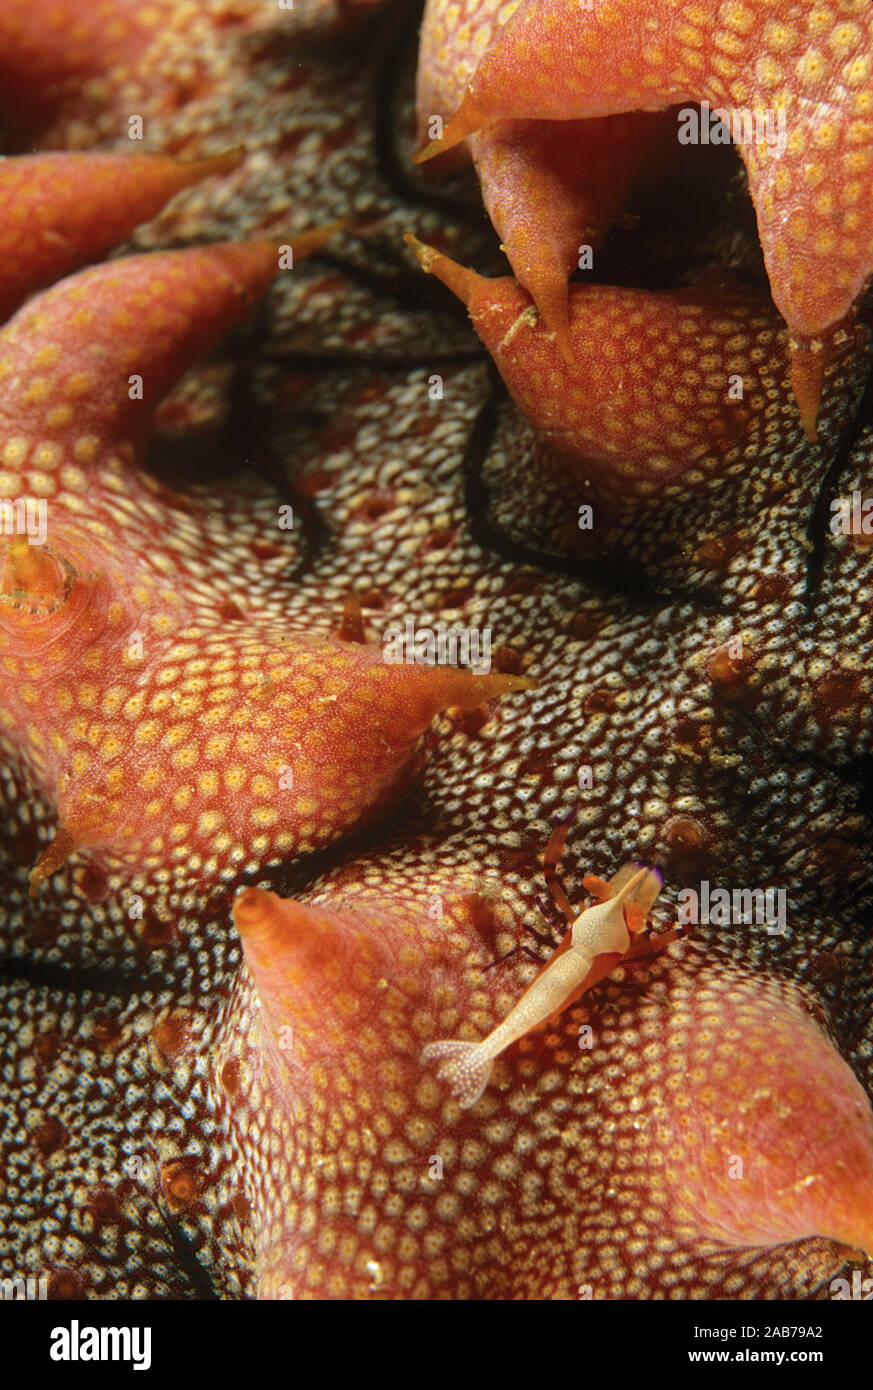 Commensal shrimp (Periclimenes imperator), generally found on the large nudibranch Hexabranchus sp. but here on sea cucumber Stichopus sp. Papua New G Stock Photo